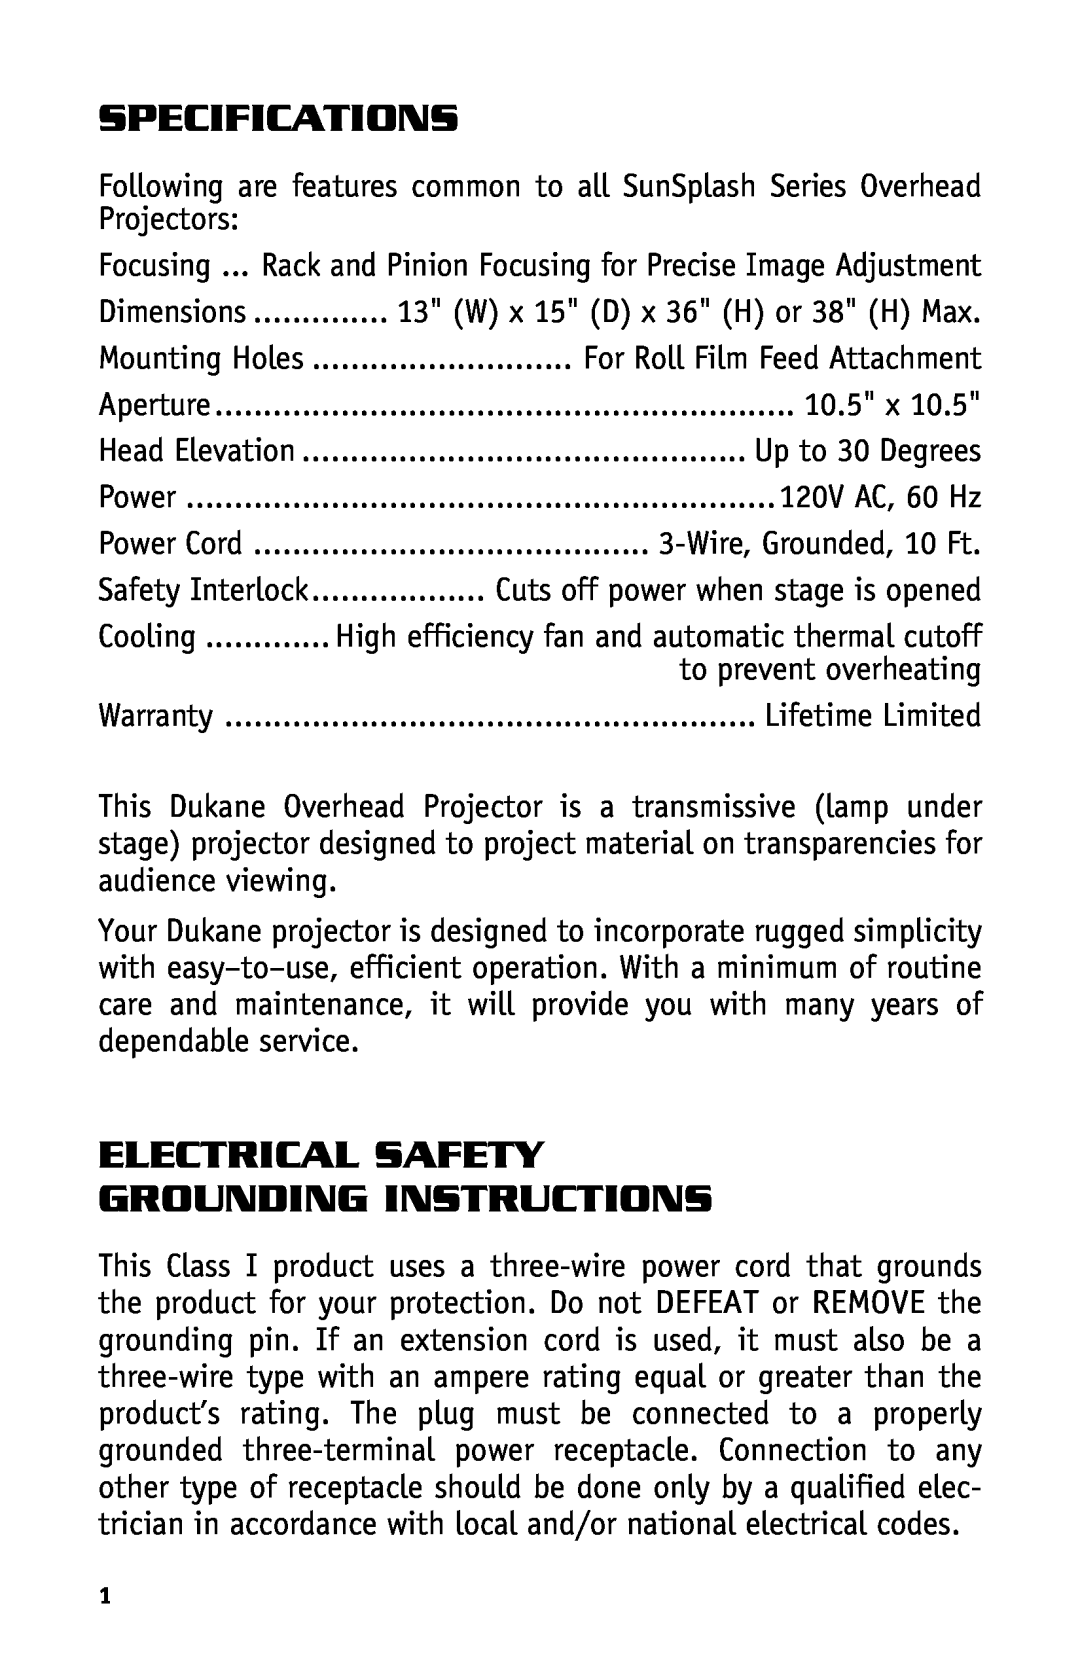 Dukane Projectors manual Specifications, Electrical Safety Grounding Instructions 